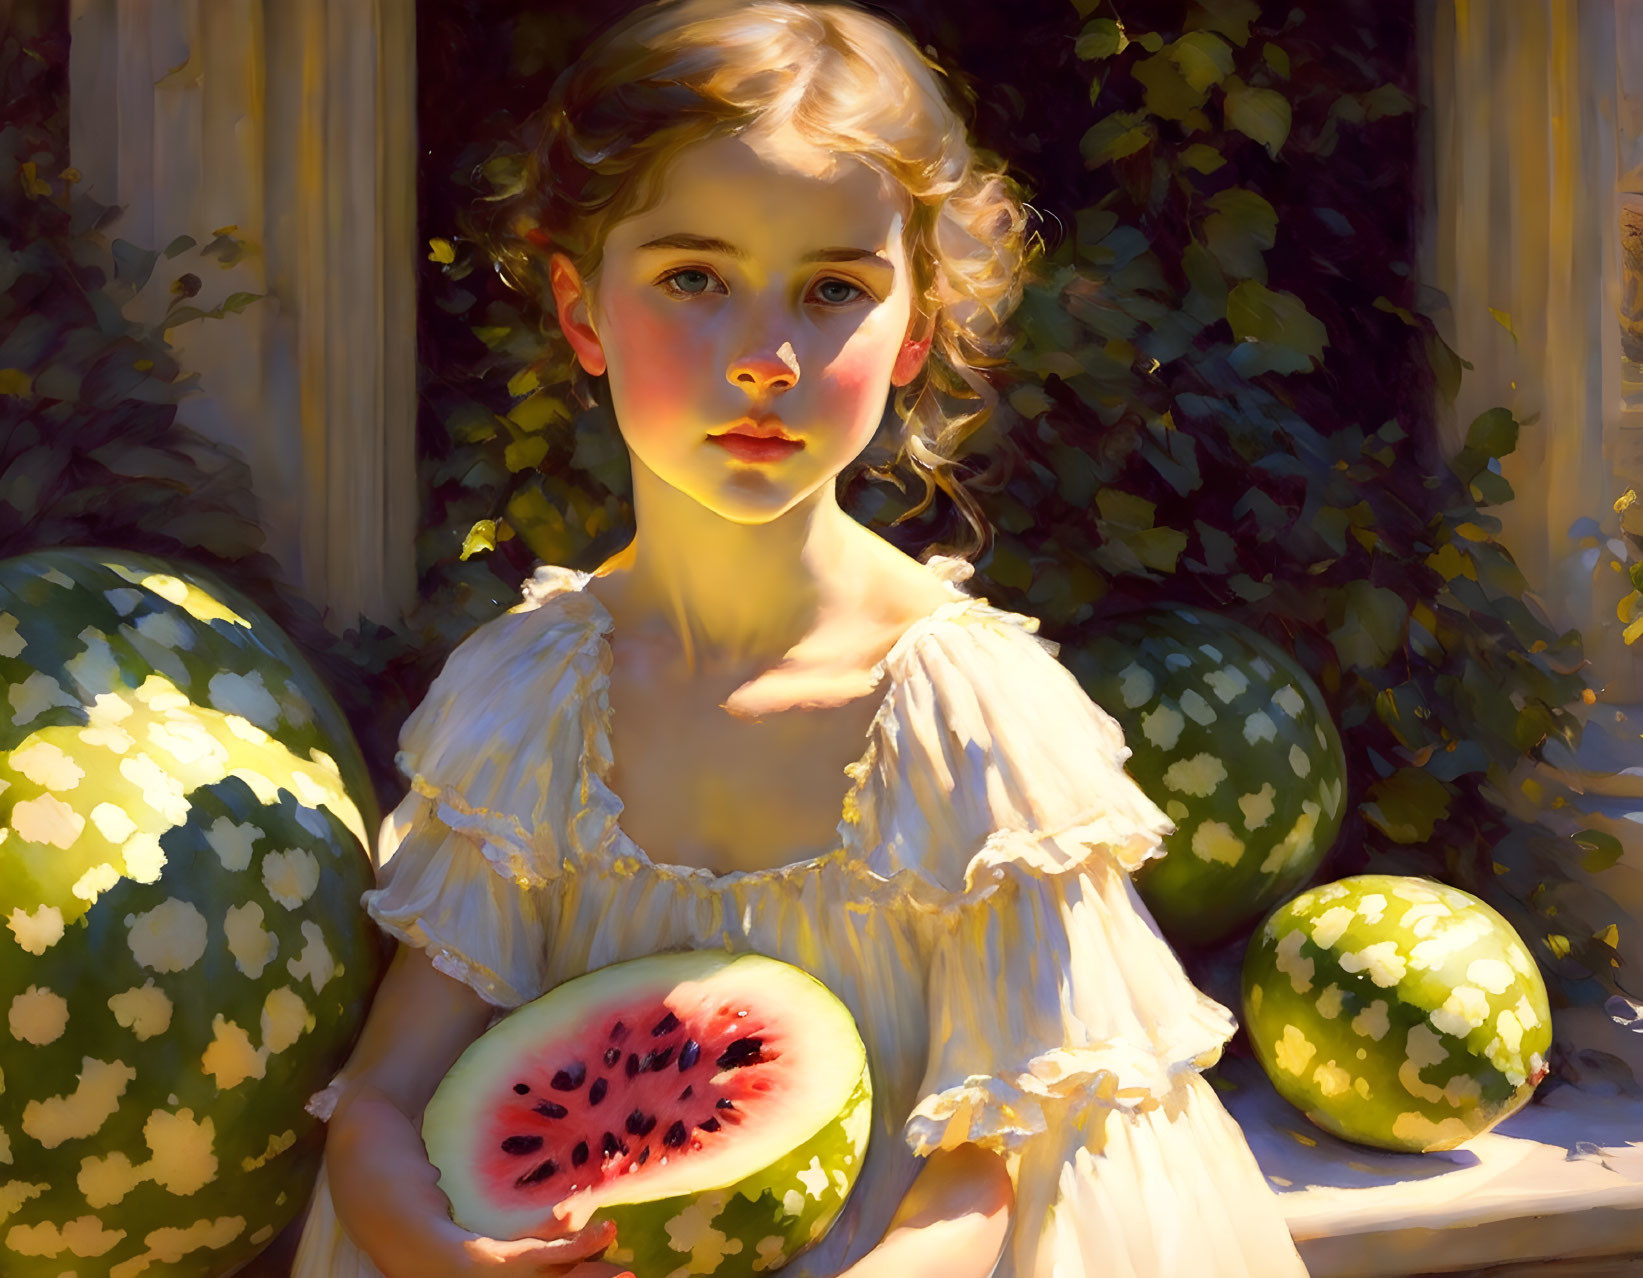 Young girl with watermelon slice in sunny garden.